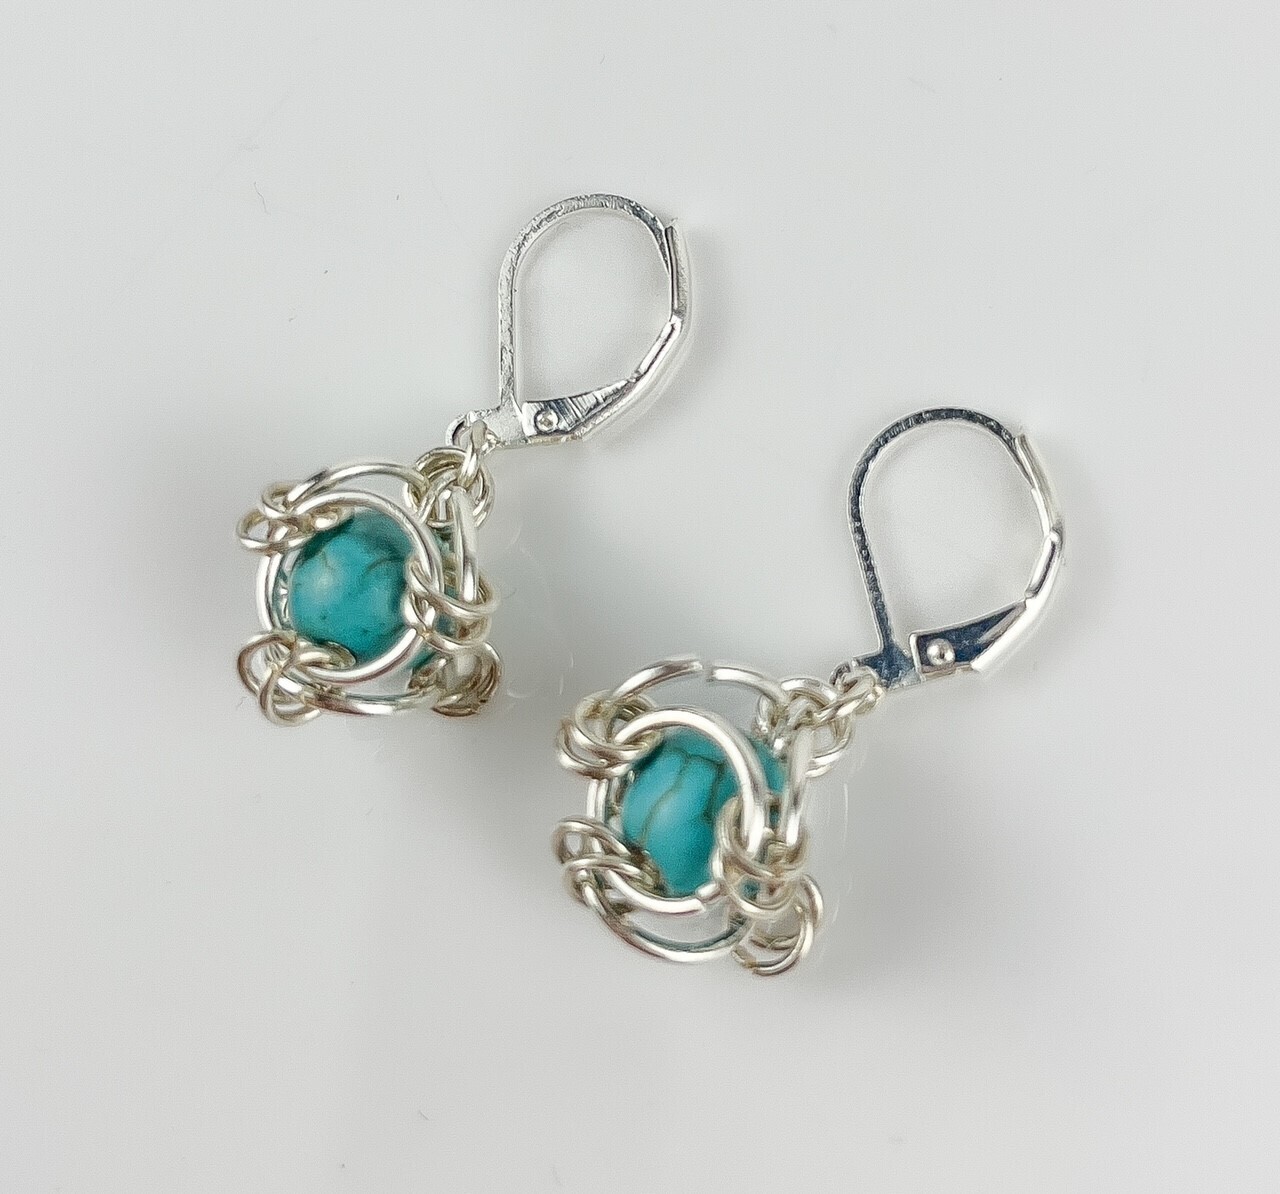 Silver Hook Earrings, Options: A- Dyed Howlite